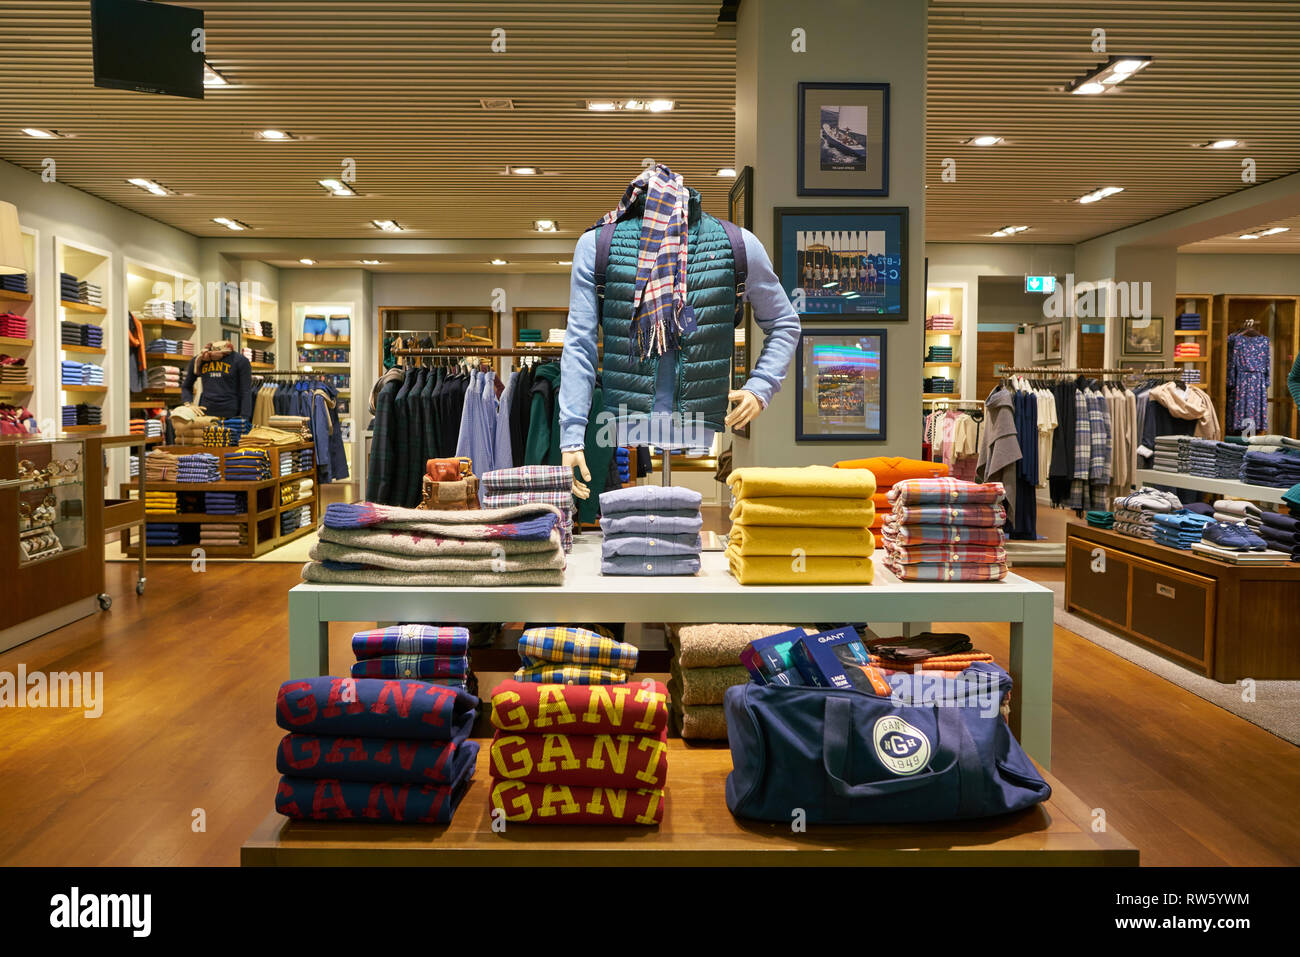 Gant Store Shop Interior High Resolution Stock Photography and Images -  Alamy